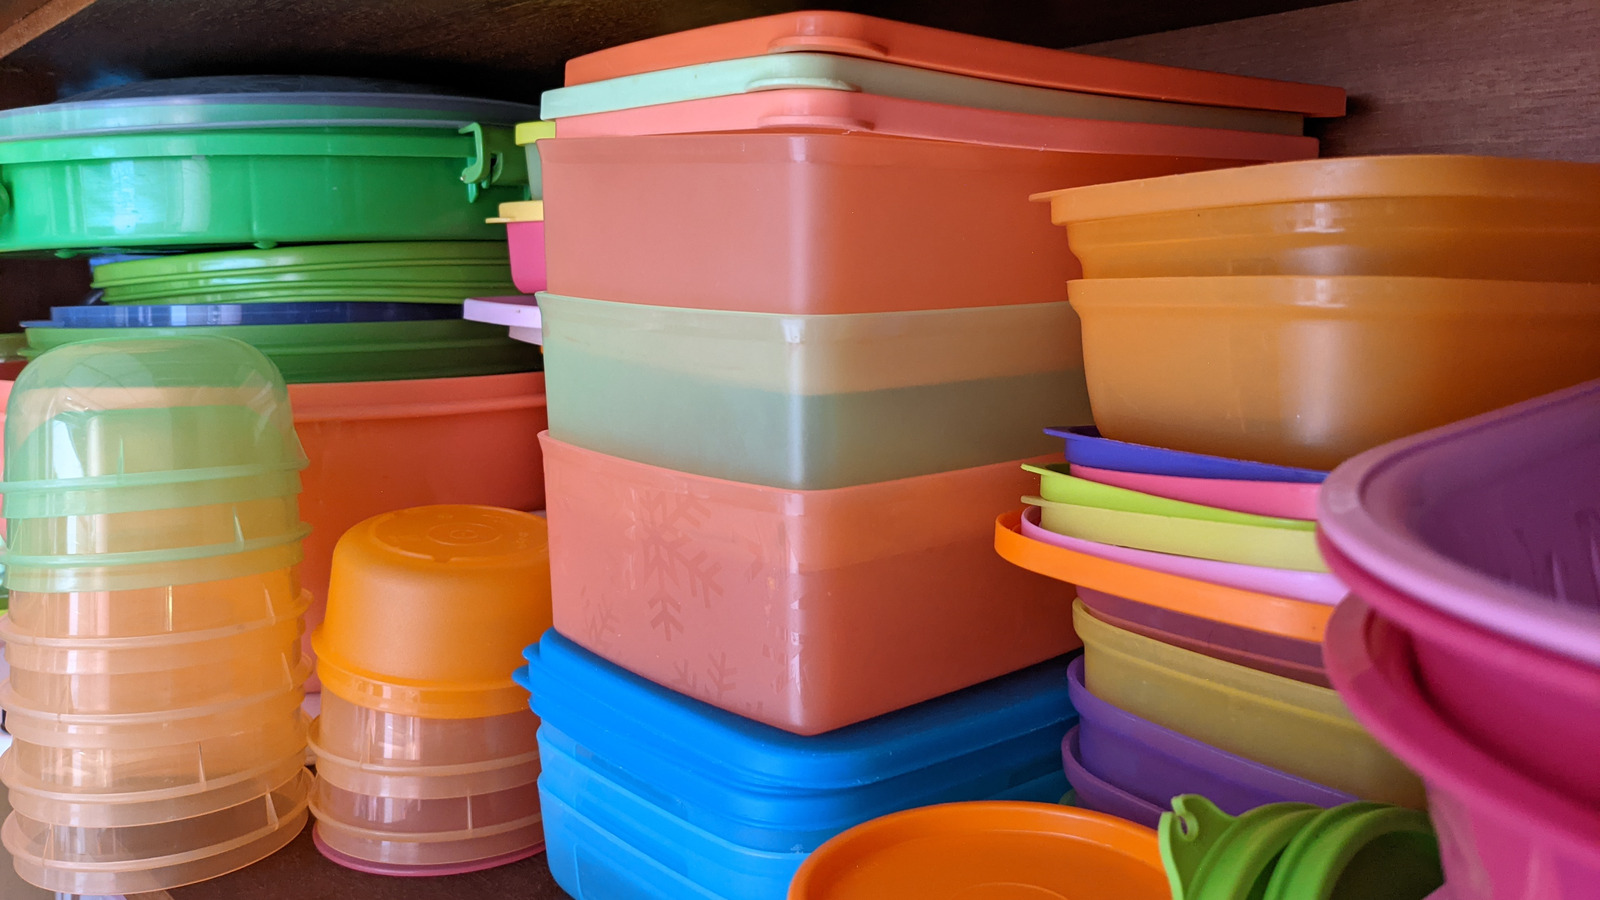 https://www.housedigest.com/img/gallery/the-brilliant-storage-hack-that-keeps-your-plastic-container-lids-organized/l-intro-1694797272.jpg